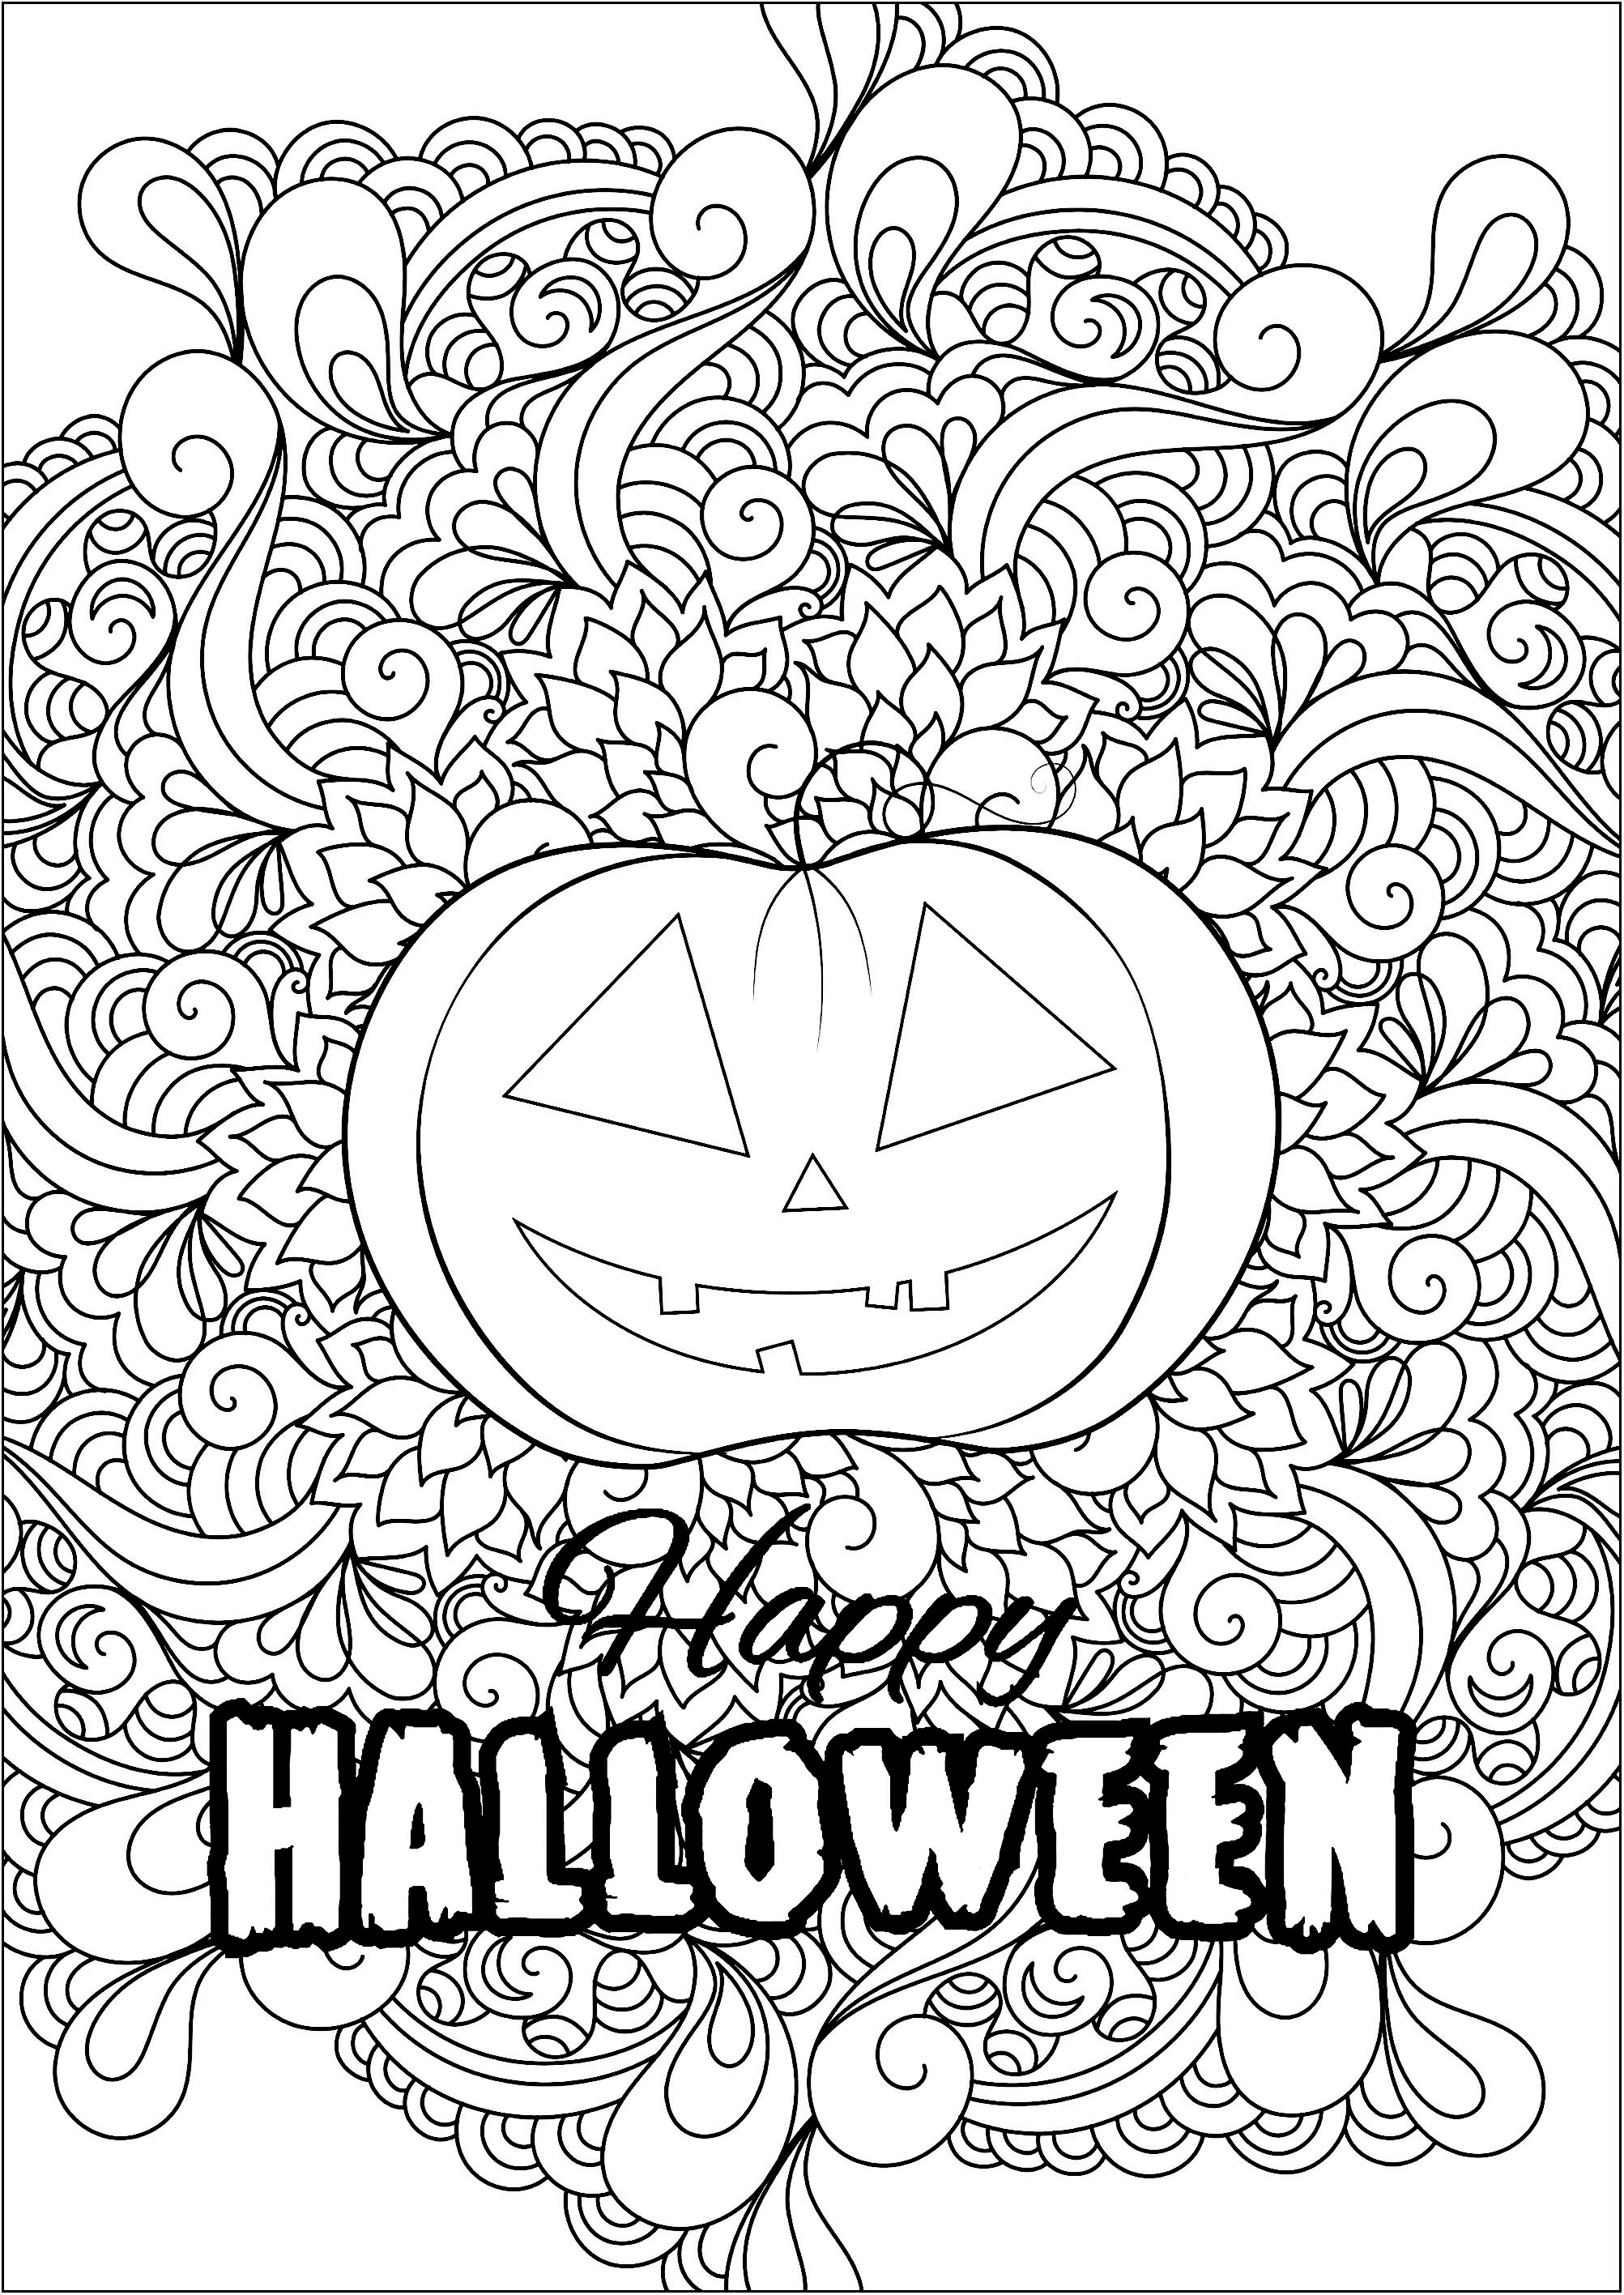 Pretty pumpkin with abstract motifs in the center. A perfect coloring book to celebrate Halloween in color .., Source : 123rf   Artist : Veronikaby